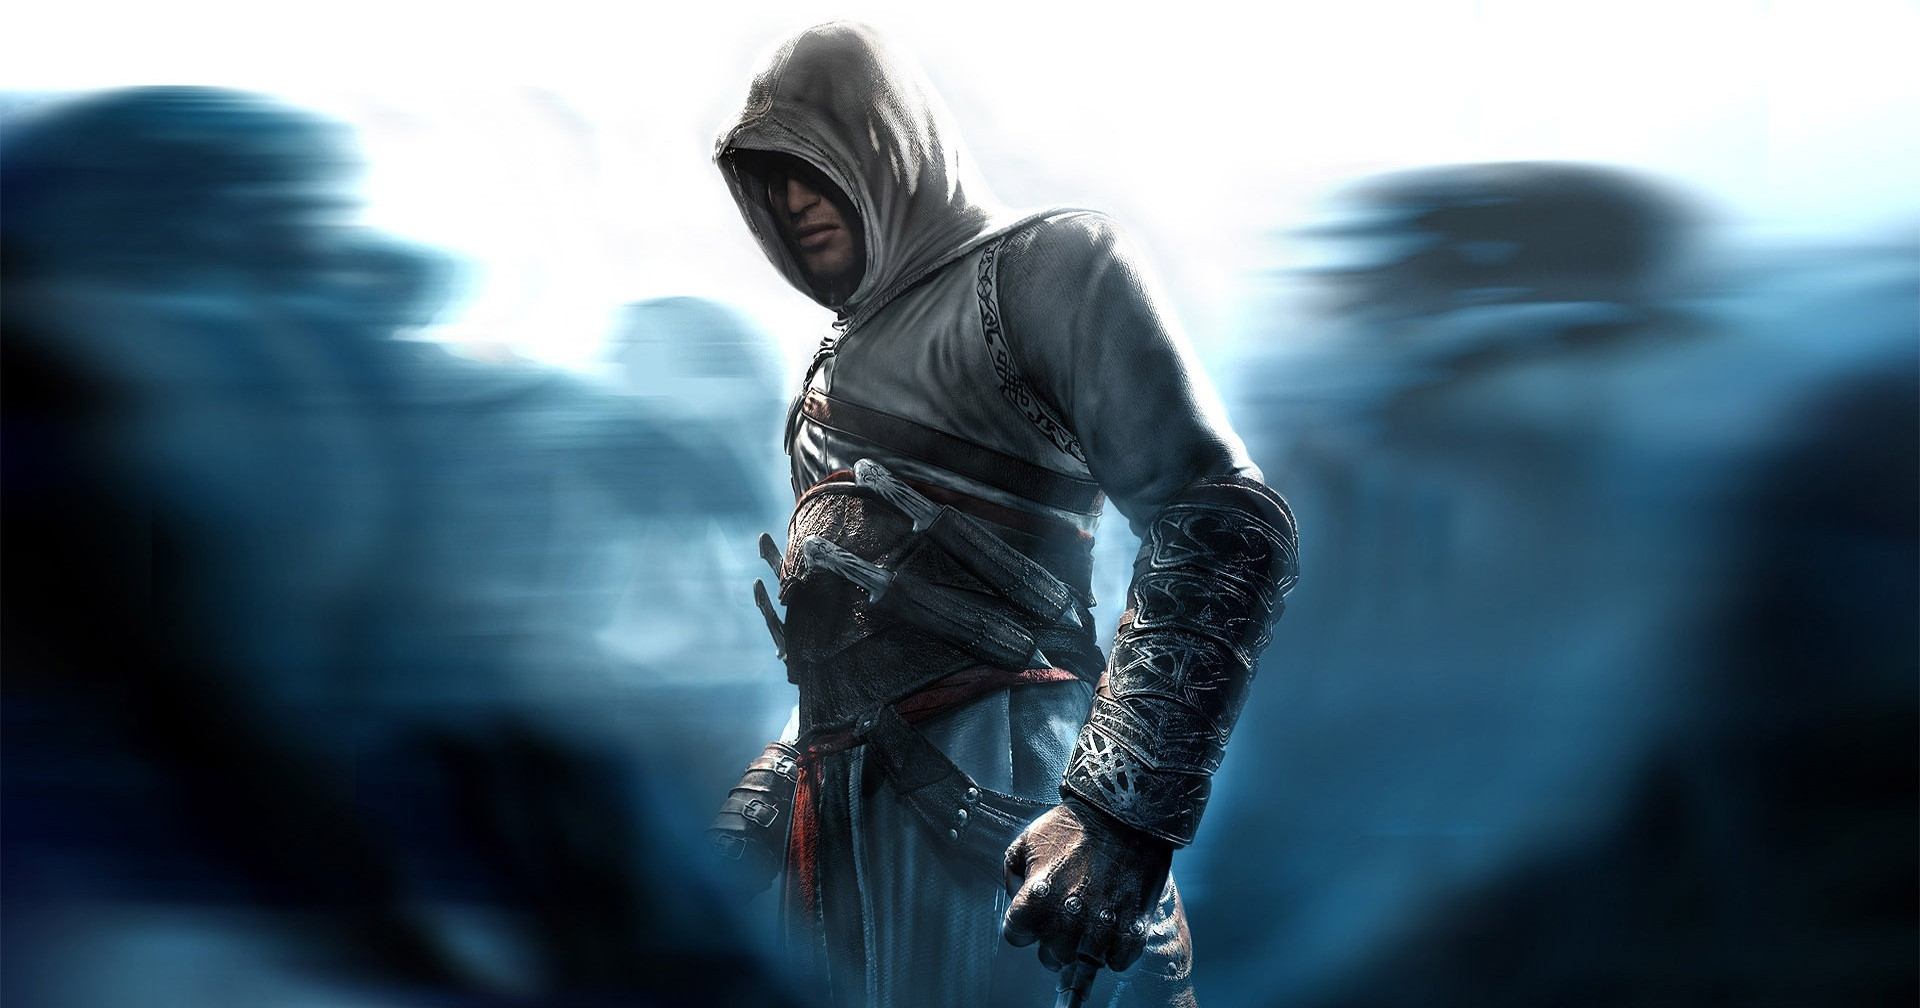 In this artwork from AC 1, we see the assassin in the center in a white robe, standing in front of a cold blurry crowd.